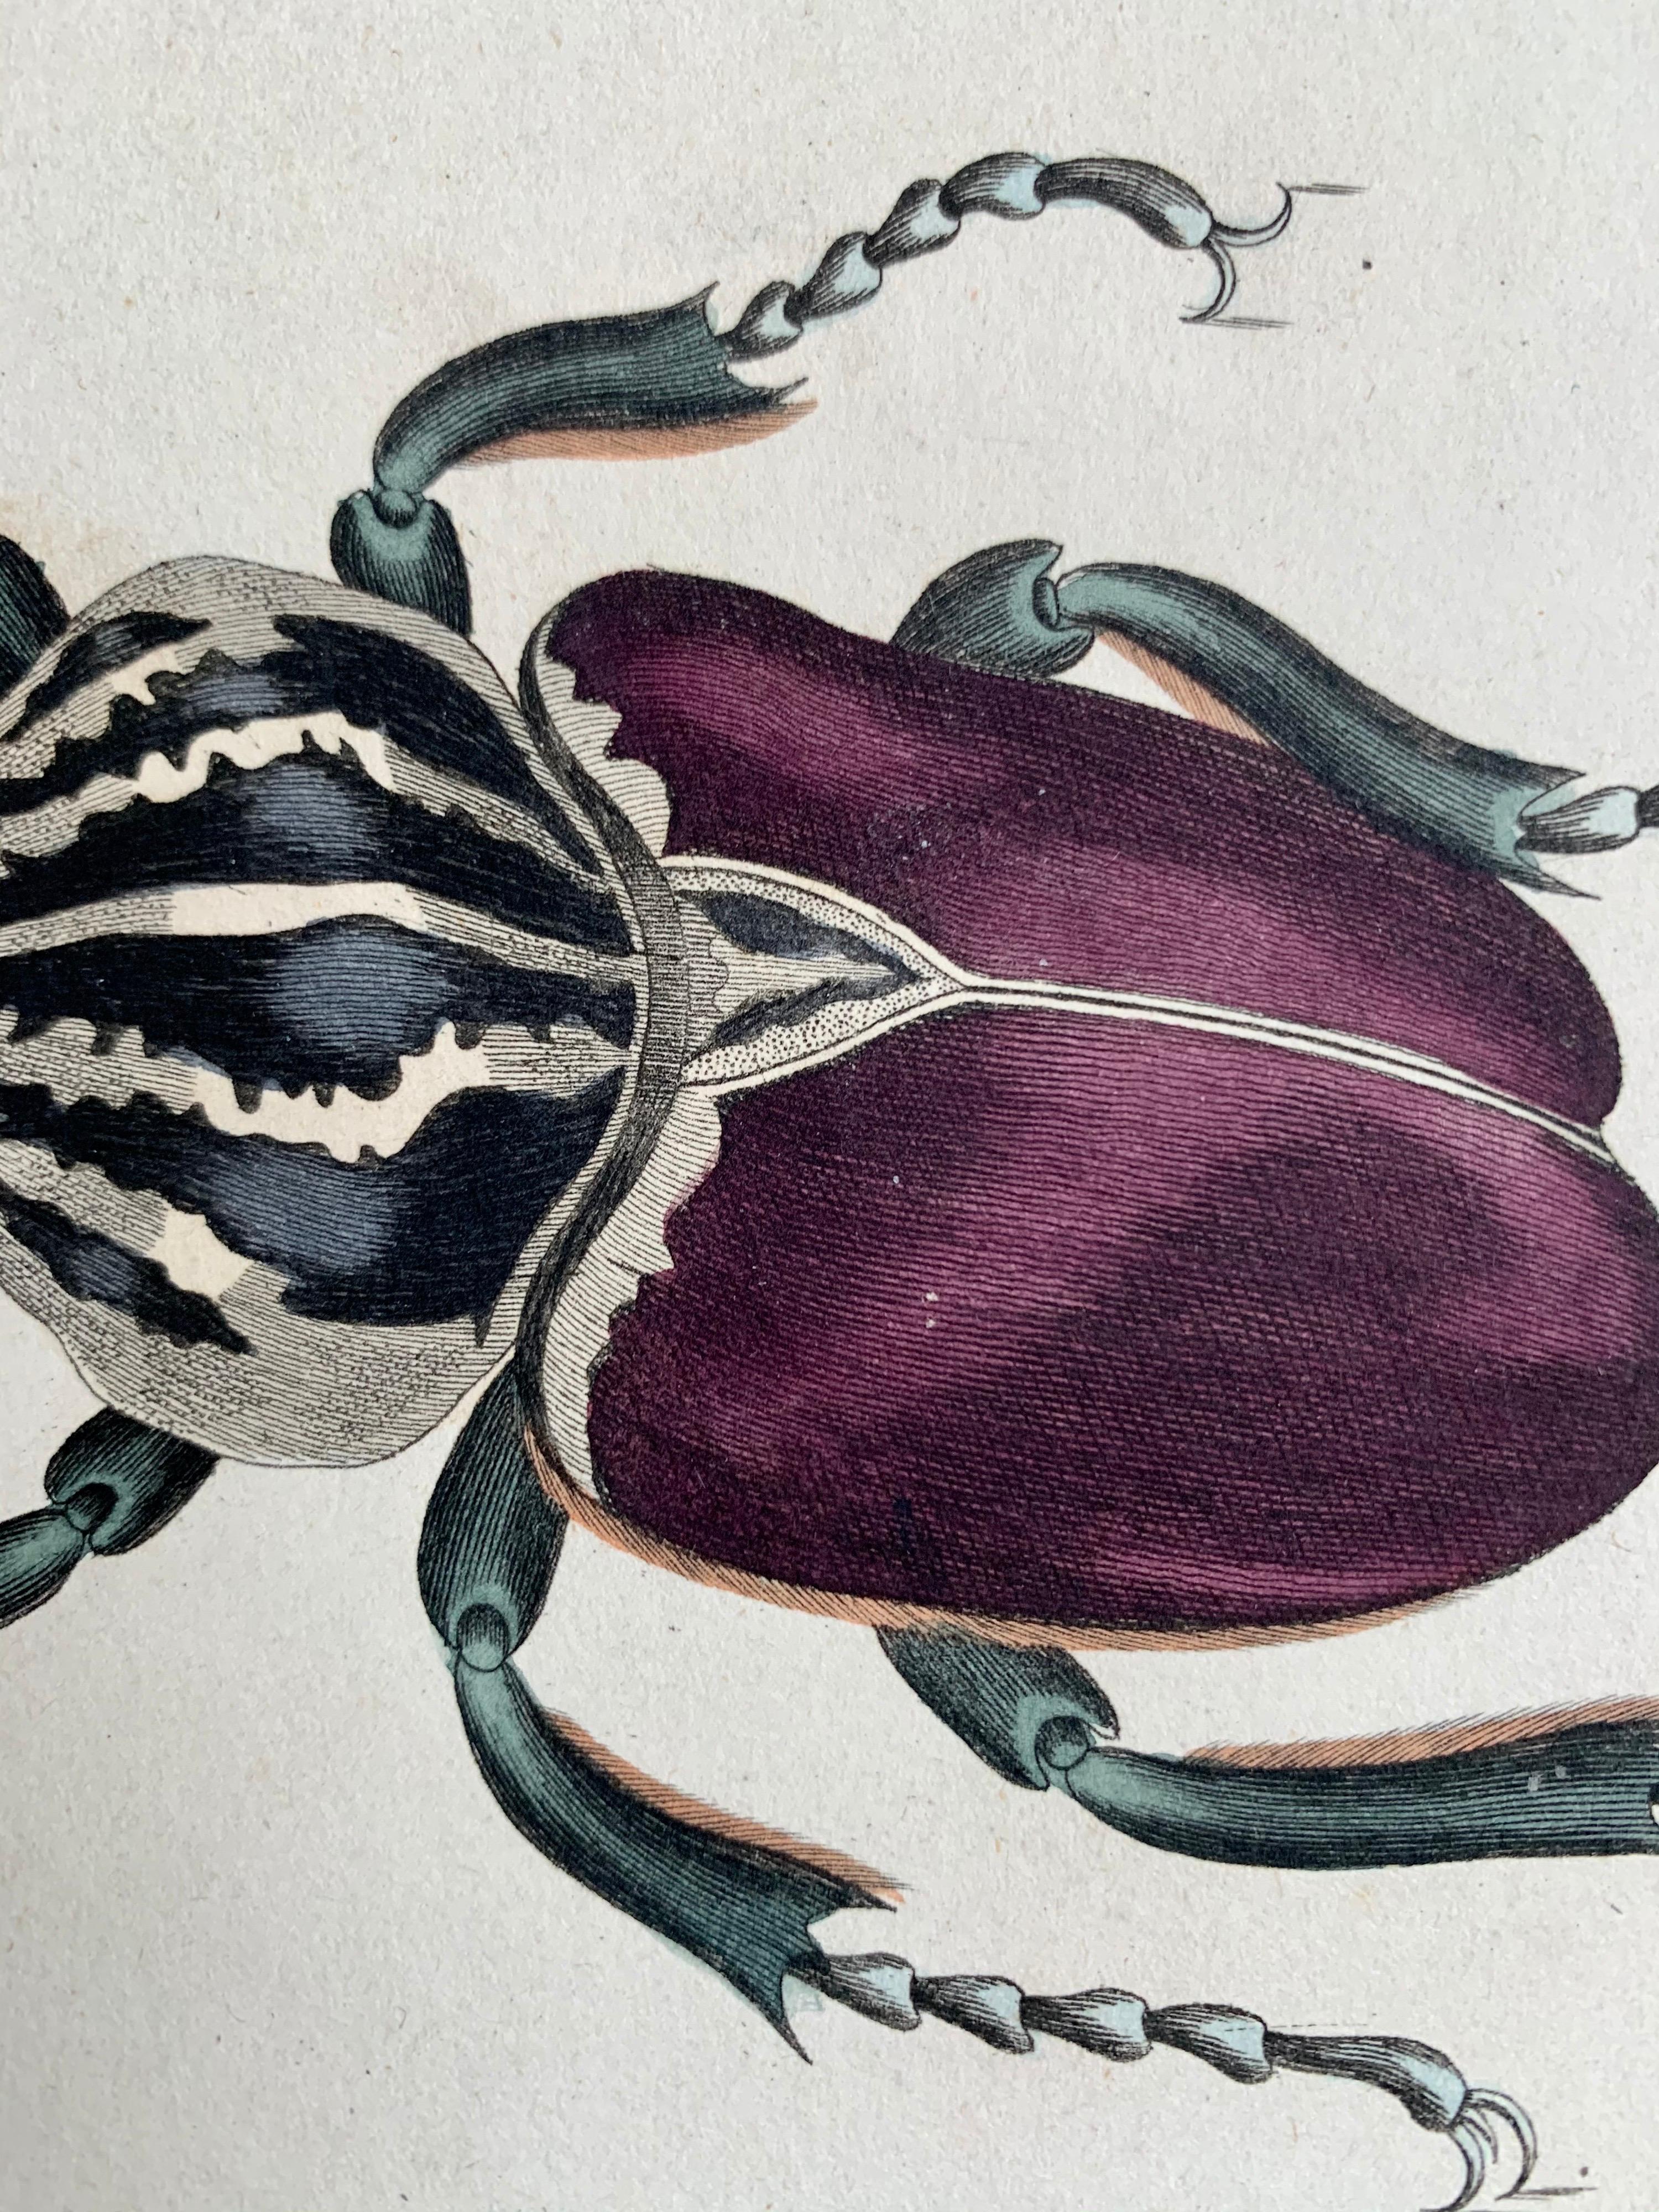 Hand colored print of two large beetles; a Scarabeus Atlas and a Cetonia Goliata published in 1840 based on the work of Scottish naturalist, Sir William Jardine, 7th Baronet.  

From 